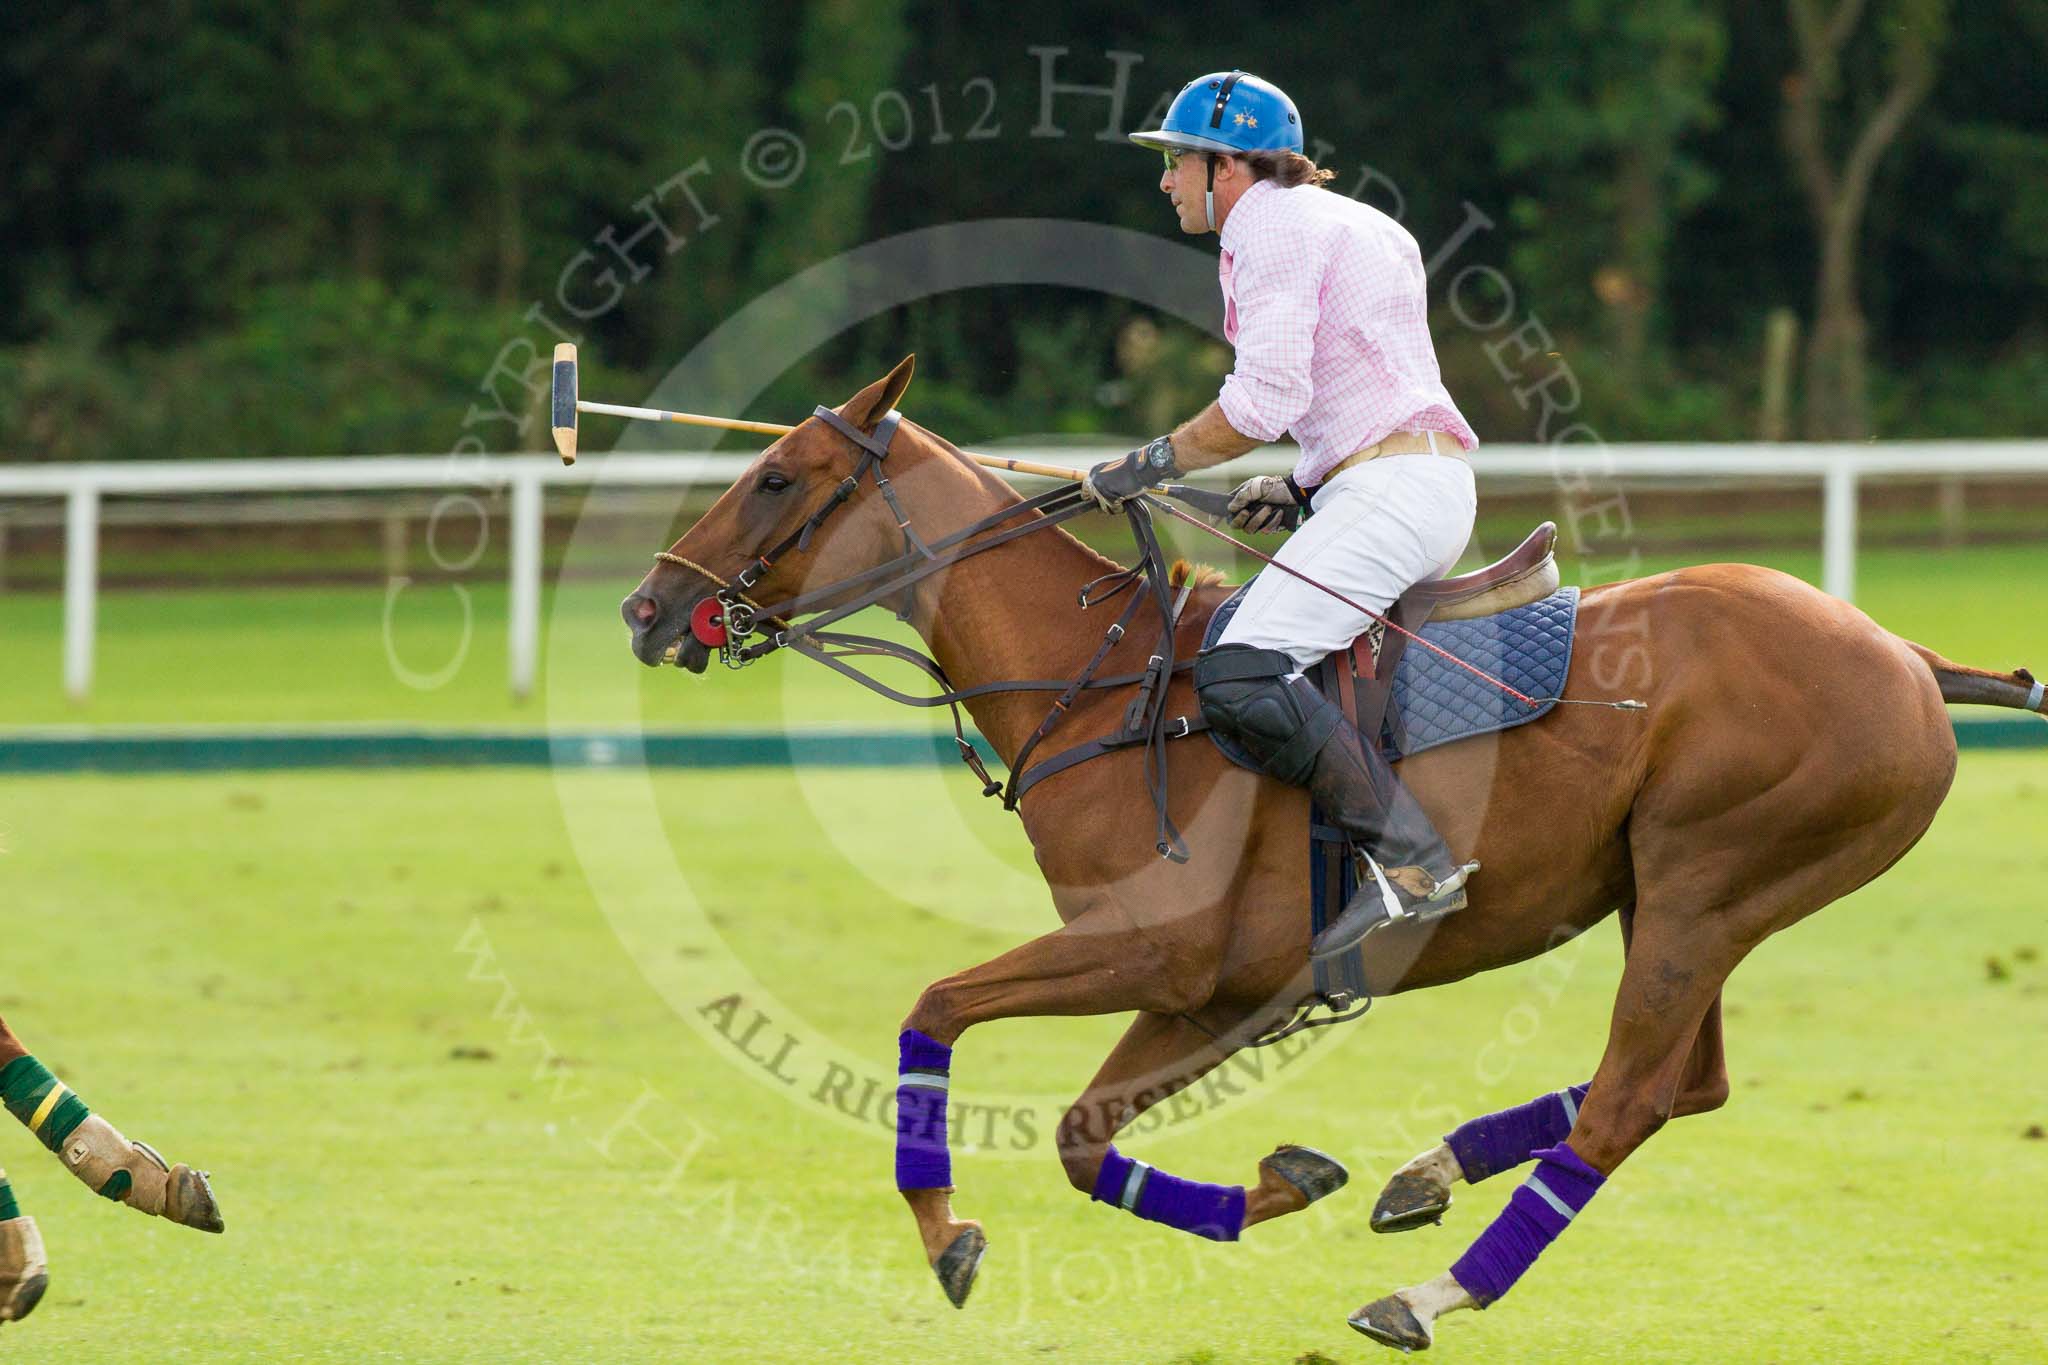 7th Heritage Polo Cup finals: justo Saveedra, Team Emerging Switzerland..
Hurtwood Park Polo Club,
Ewhurst Green,
Surrey,
United Kingdom,
on 05 August 2012 at 16:23, image #218